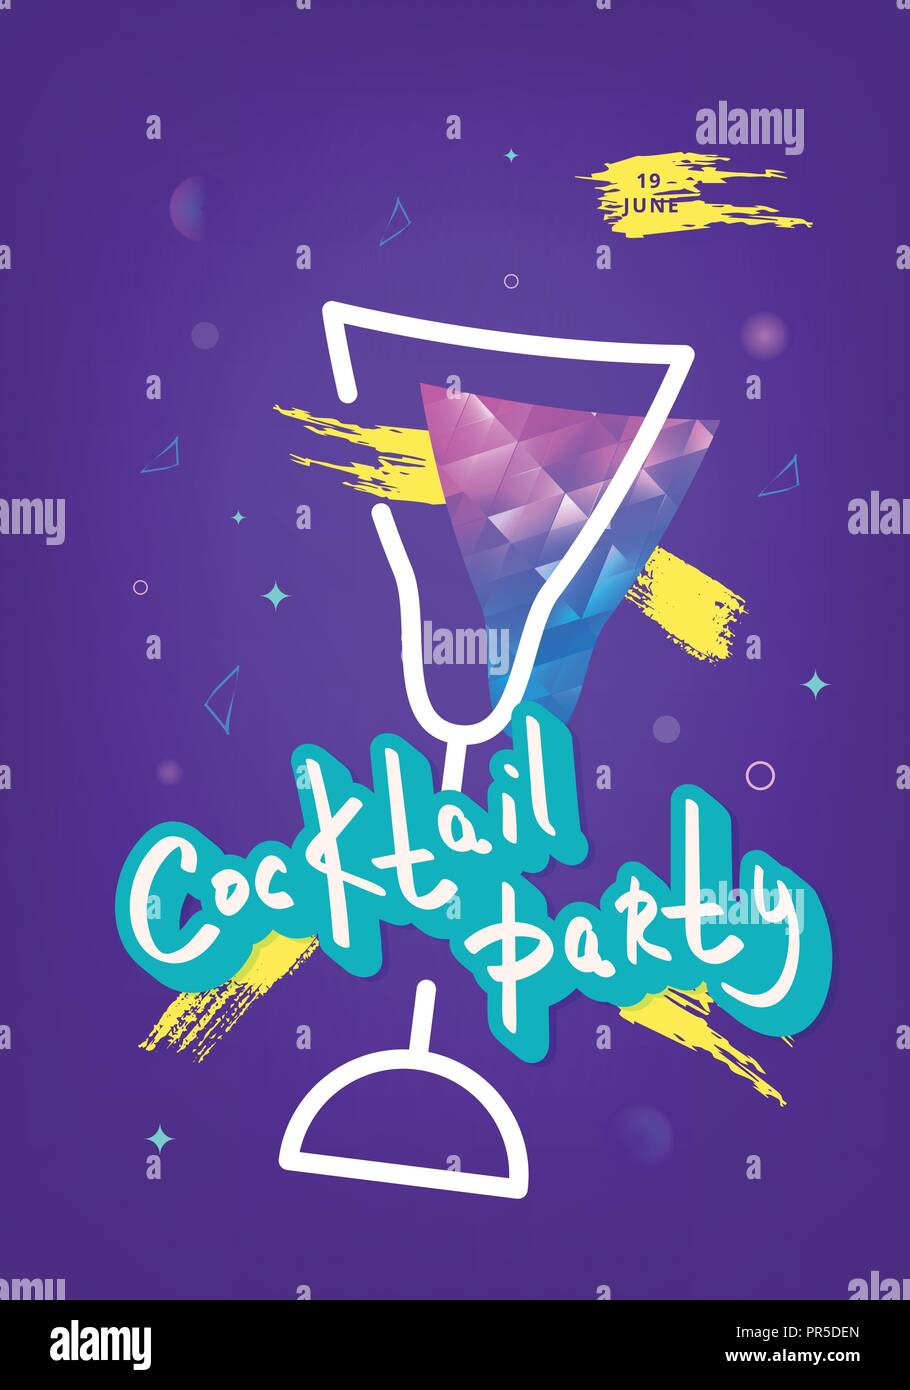 Holiday Cocktail Party Invitation Template